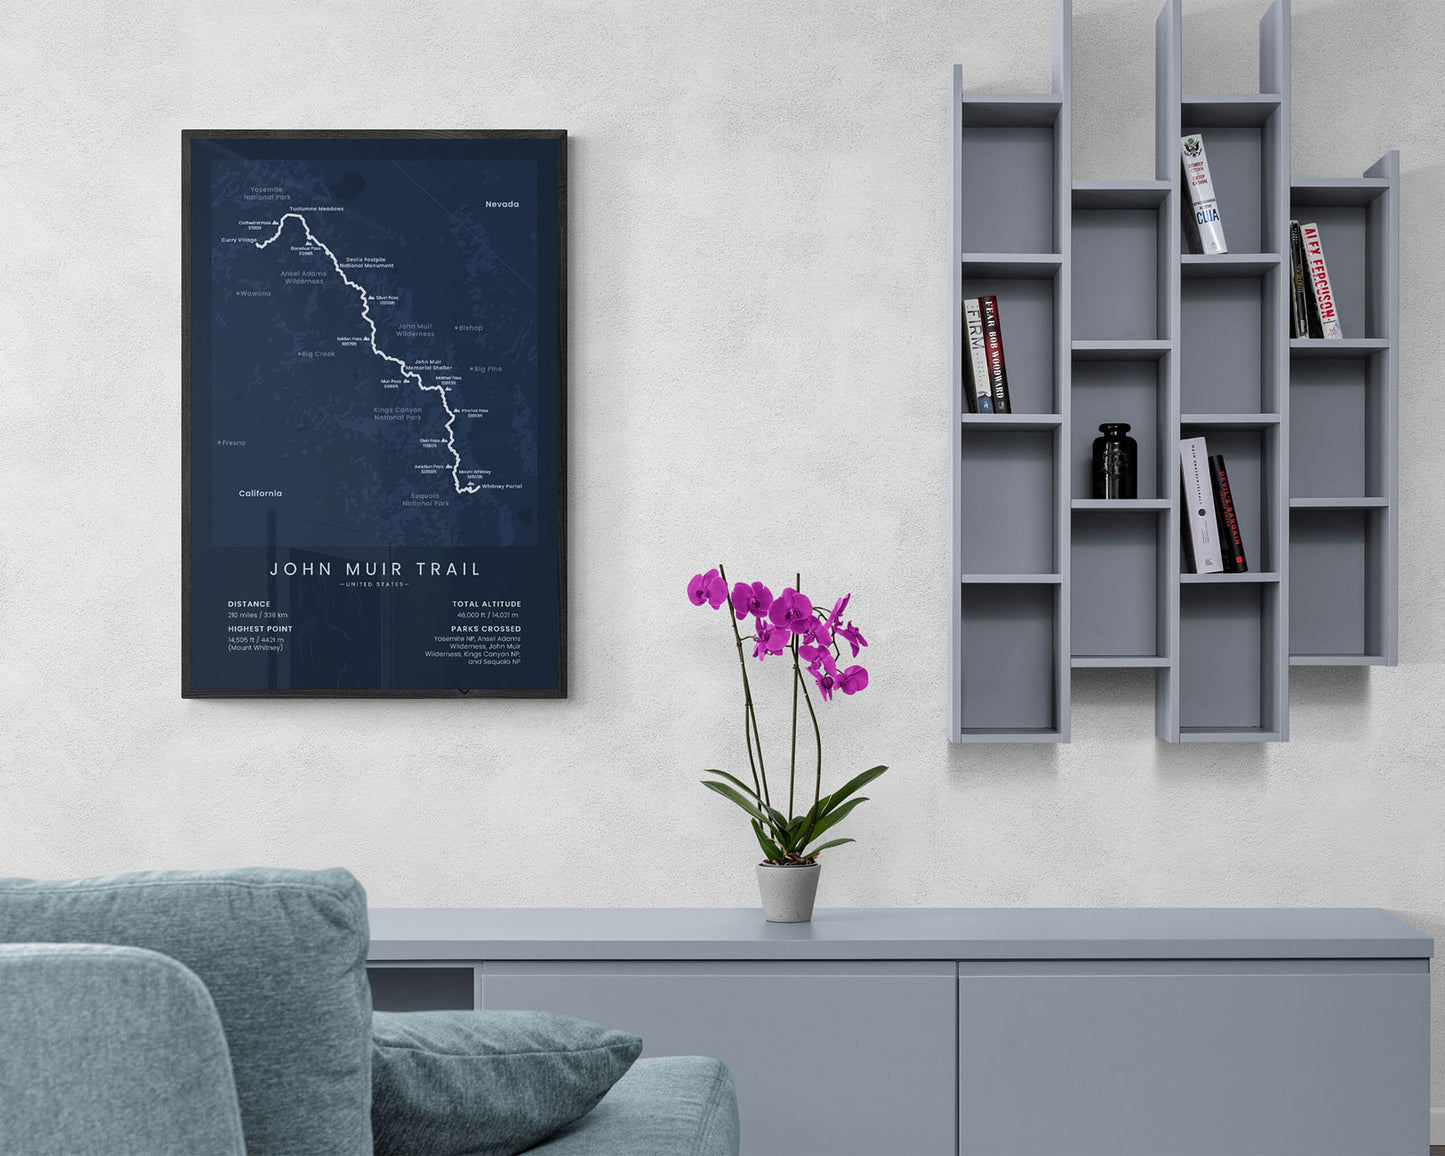 JMT minimalist map poster with blue background in living room